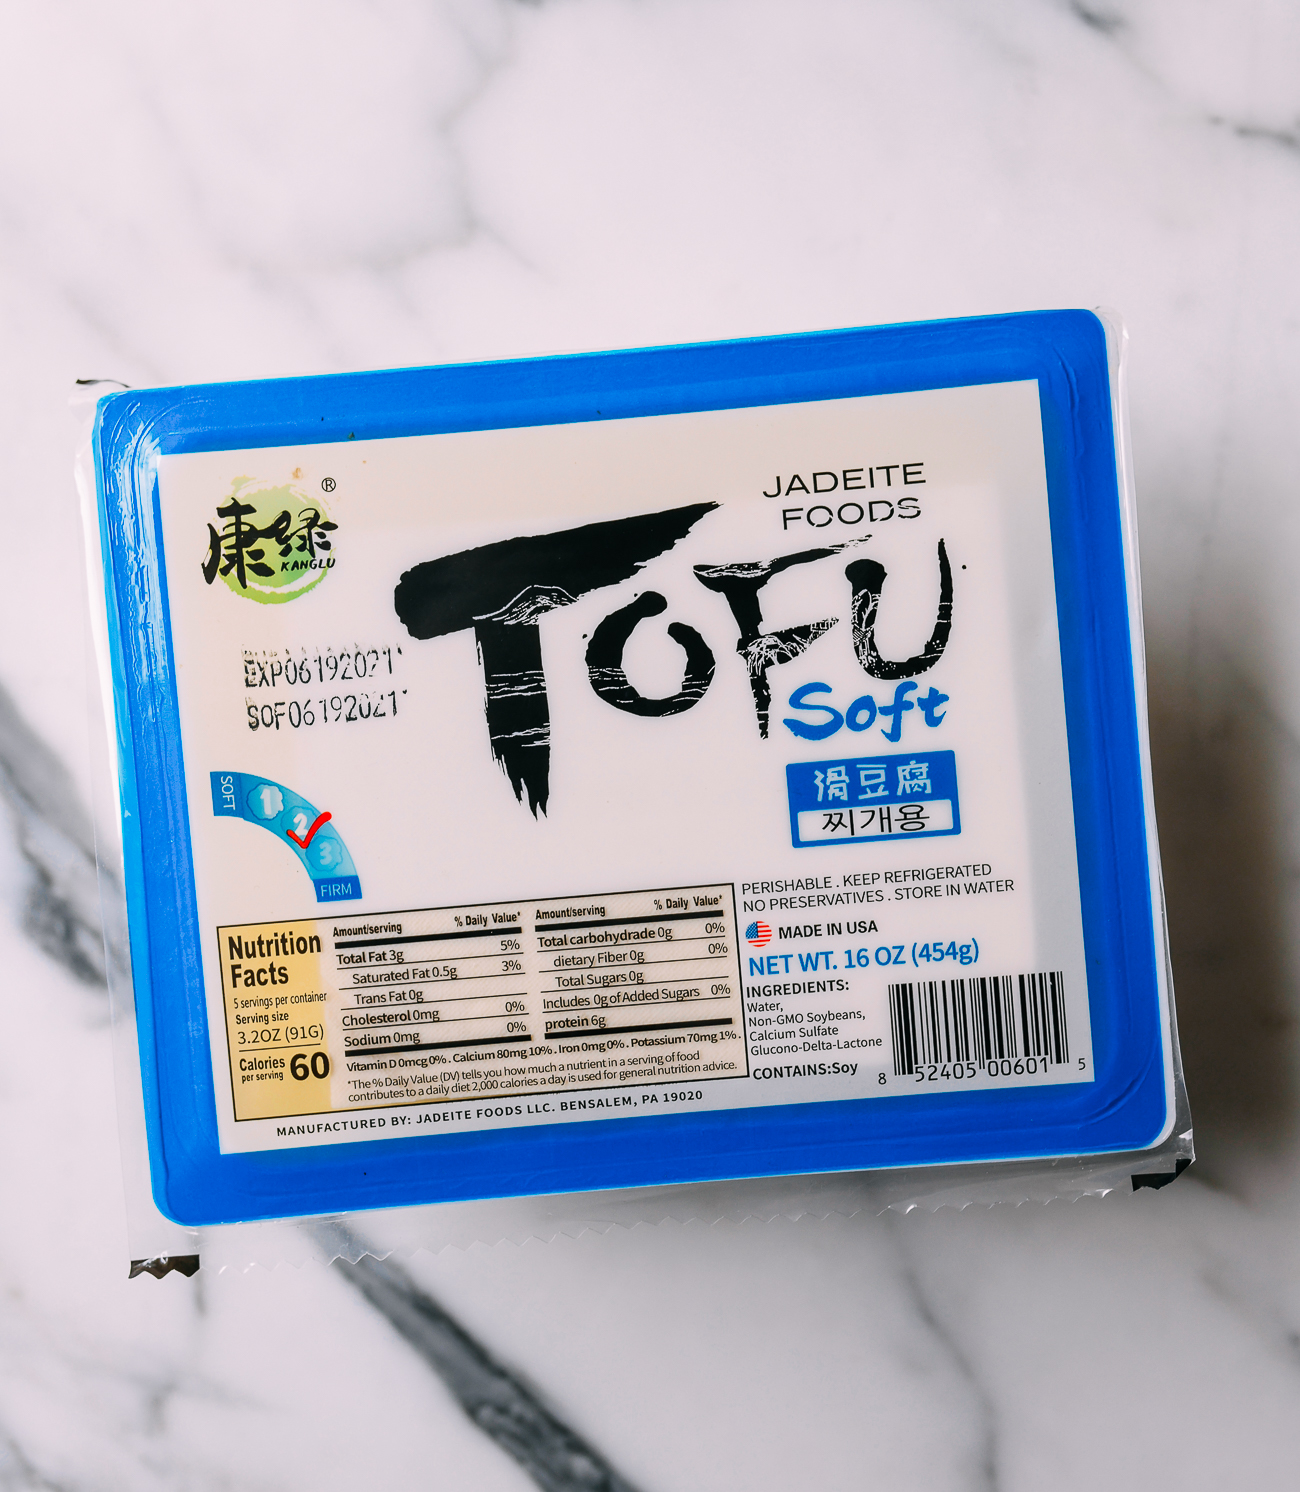 Package of soft tofu